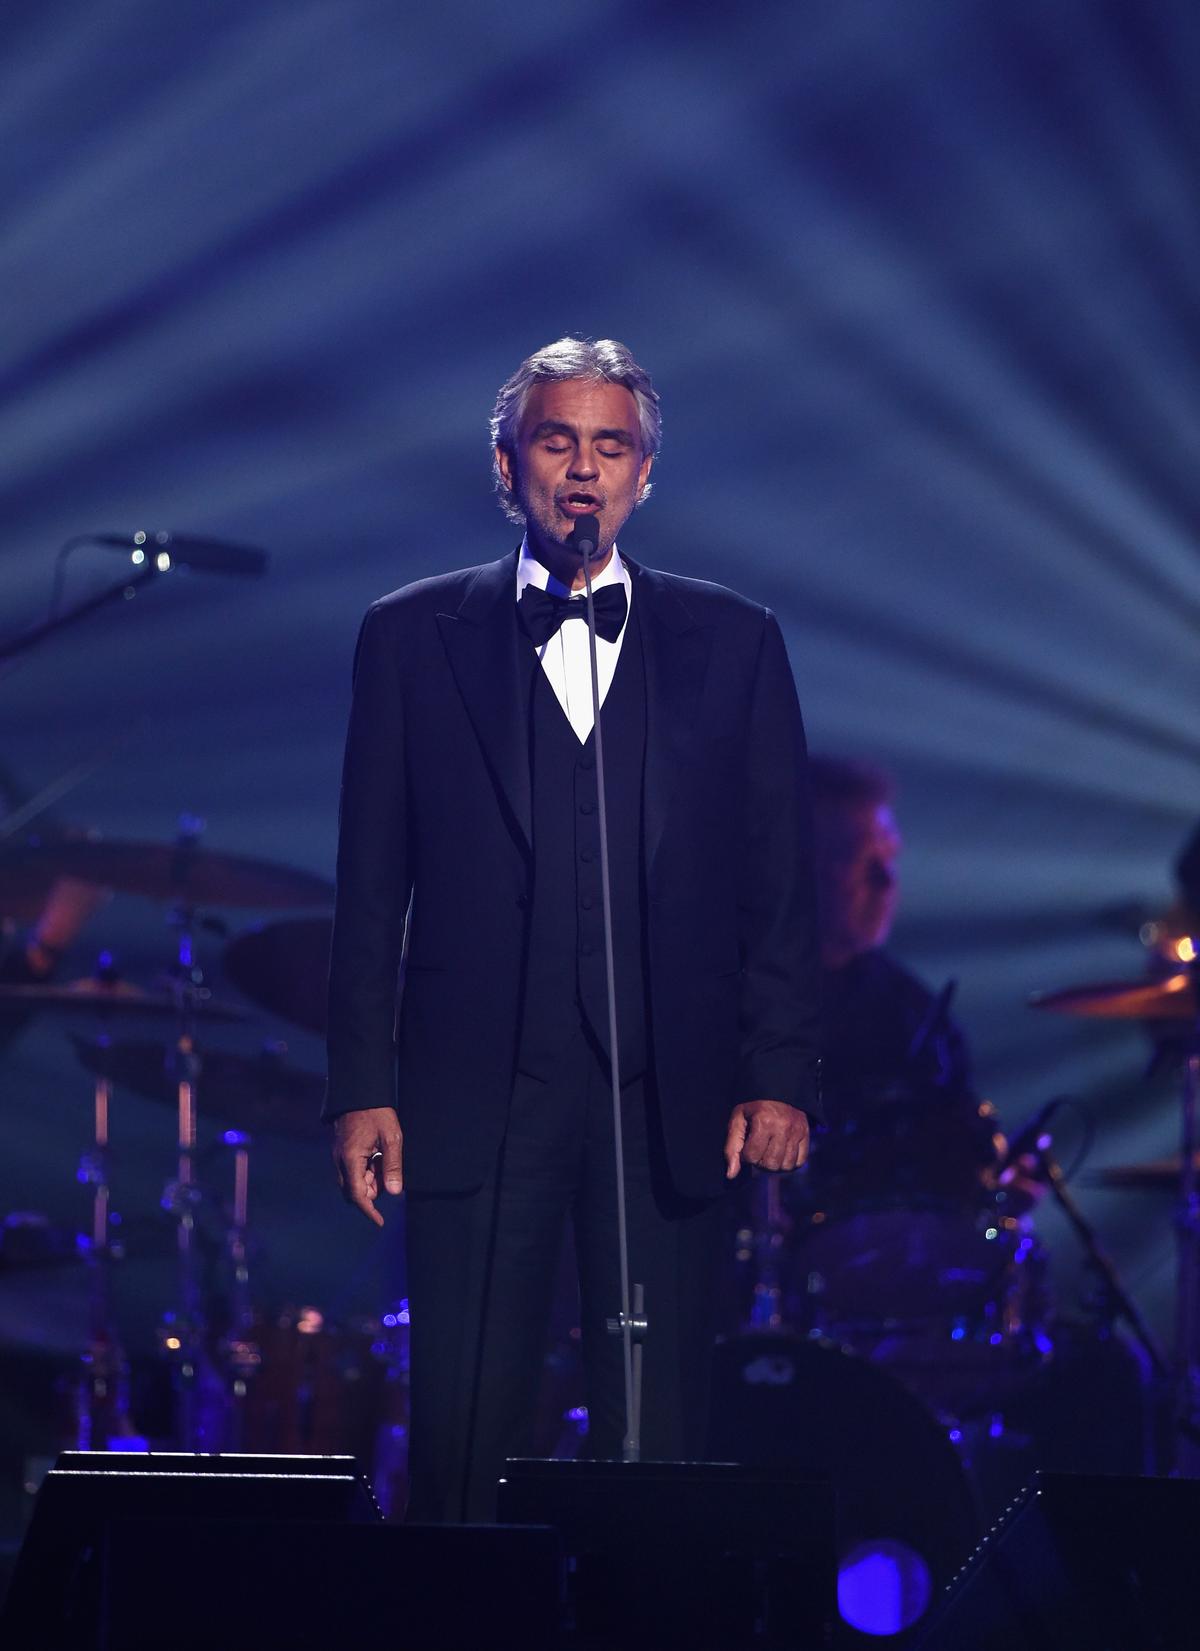 Bocelli performs during the 19th annual Keep Memory Alive "Power of Love Gala" benefit at MGM Grand Garden Arena in Las Vegas, Nevada, on June 13, 2015. (©Getty Images | <a href="https://www.gettyimages.com/detail/news-photo/honoree-andrea-bocelli-performs-during-the-19th-annual-keep-news-photo/477083276?adppopup=true">Ethan Miller</a>)